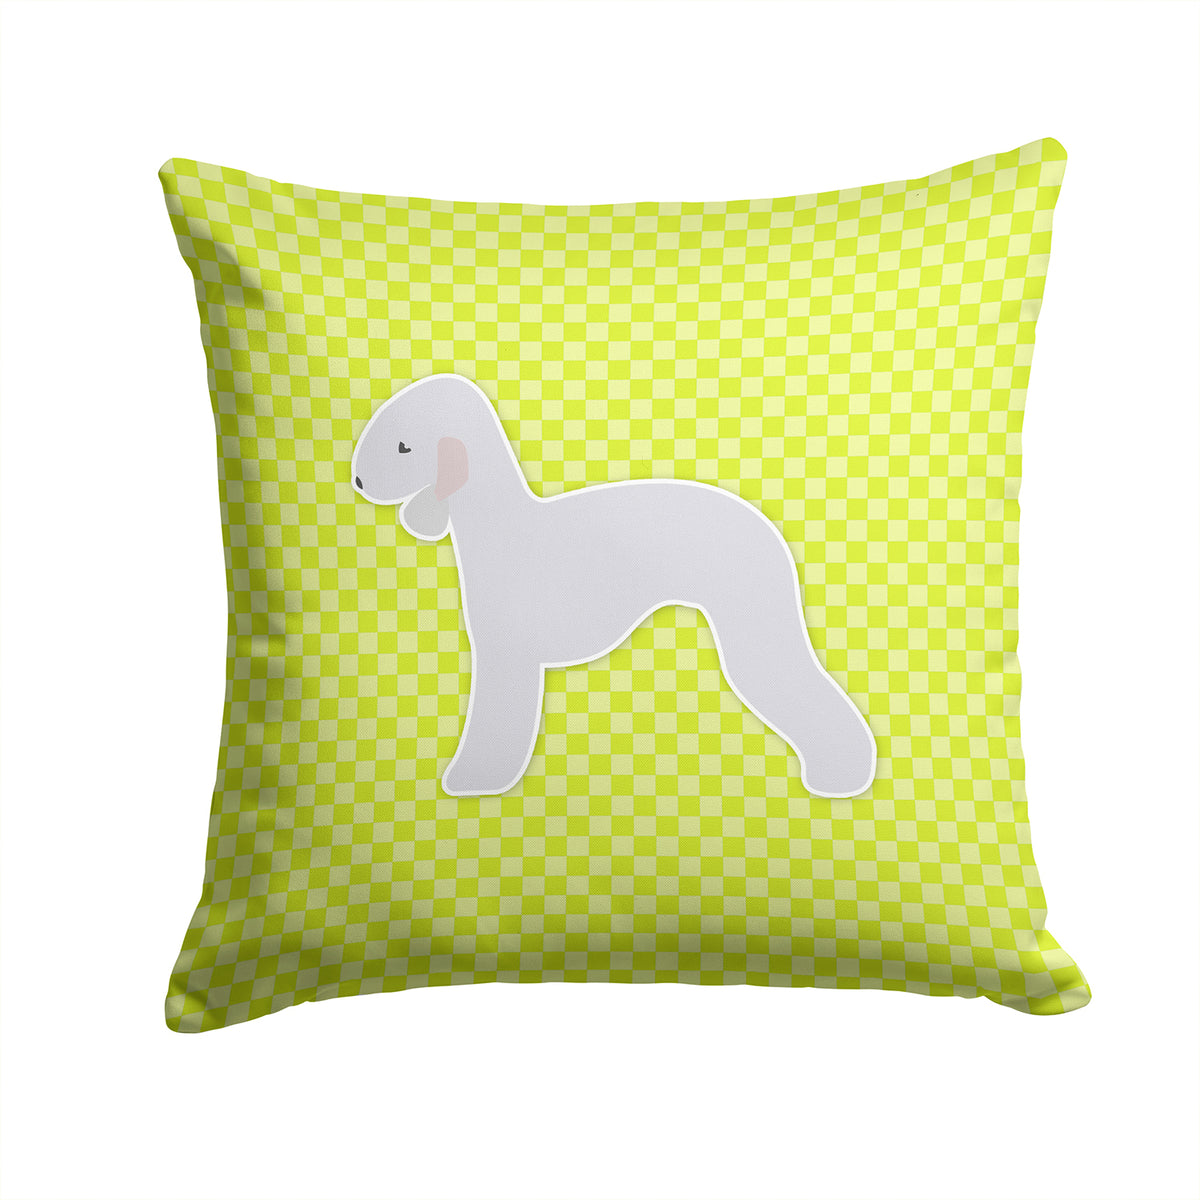 Bedlington Terrier Checkerboard Green Fabric Decorative Pillow BB3794PW1414 - the-store.com